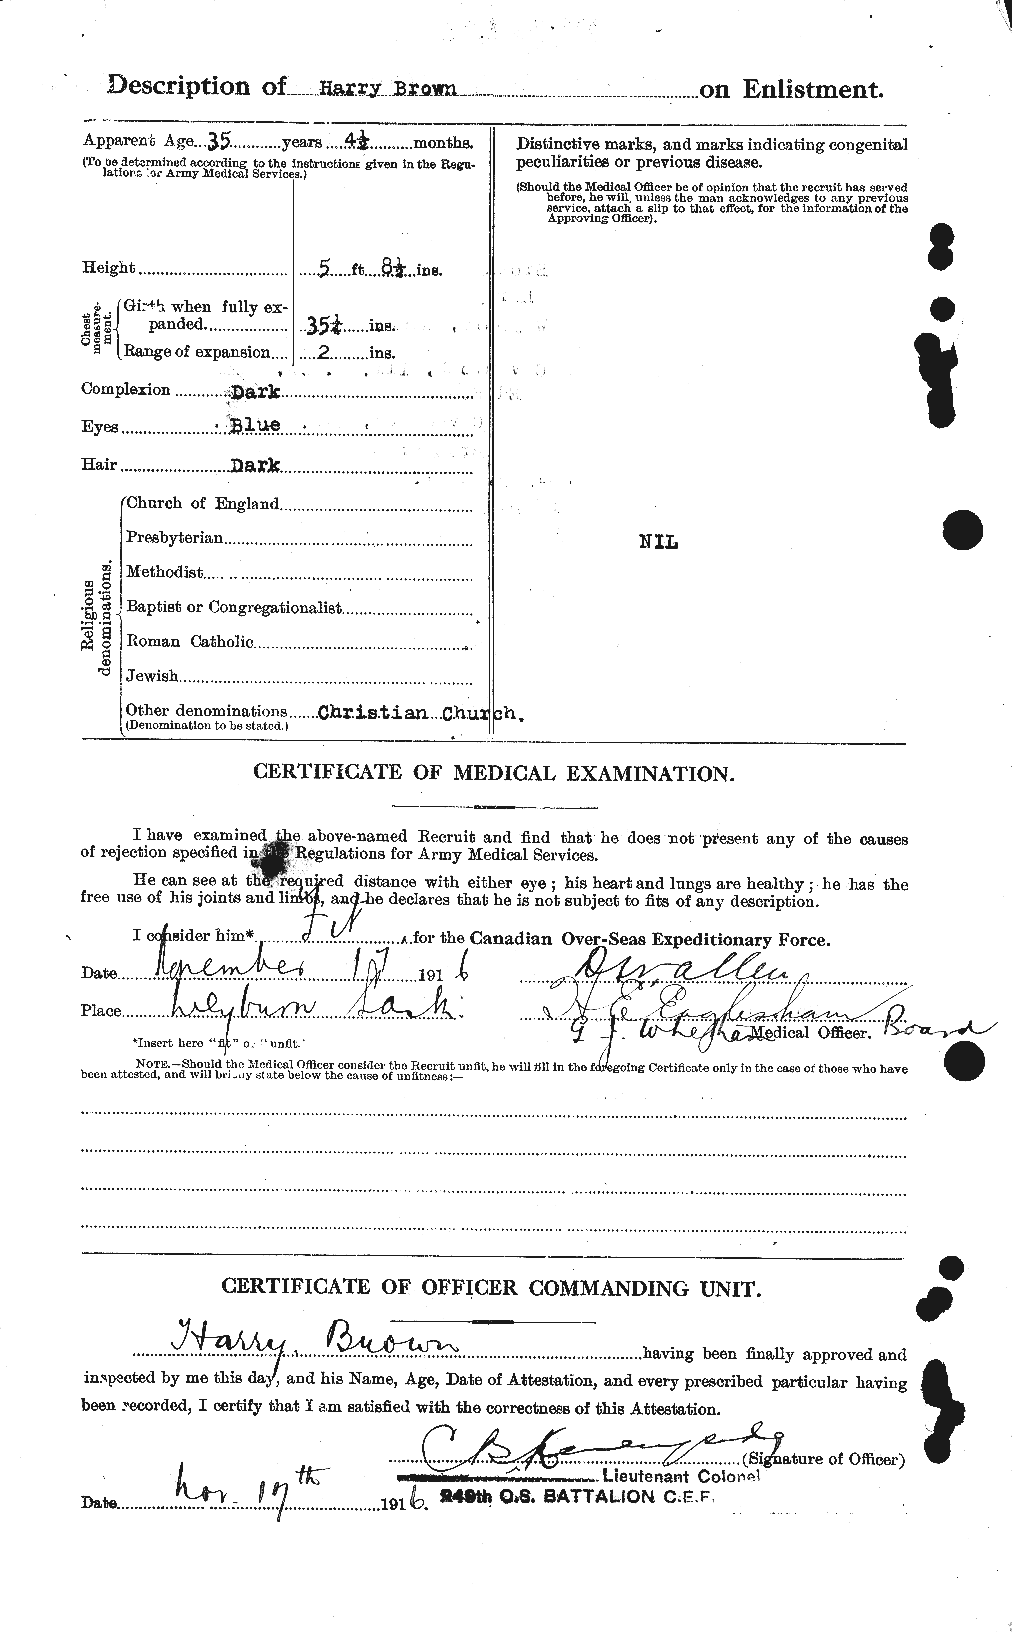 Personnel Records of the First World War - CEF 265415b